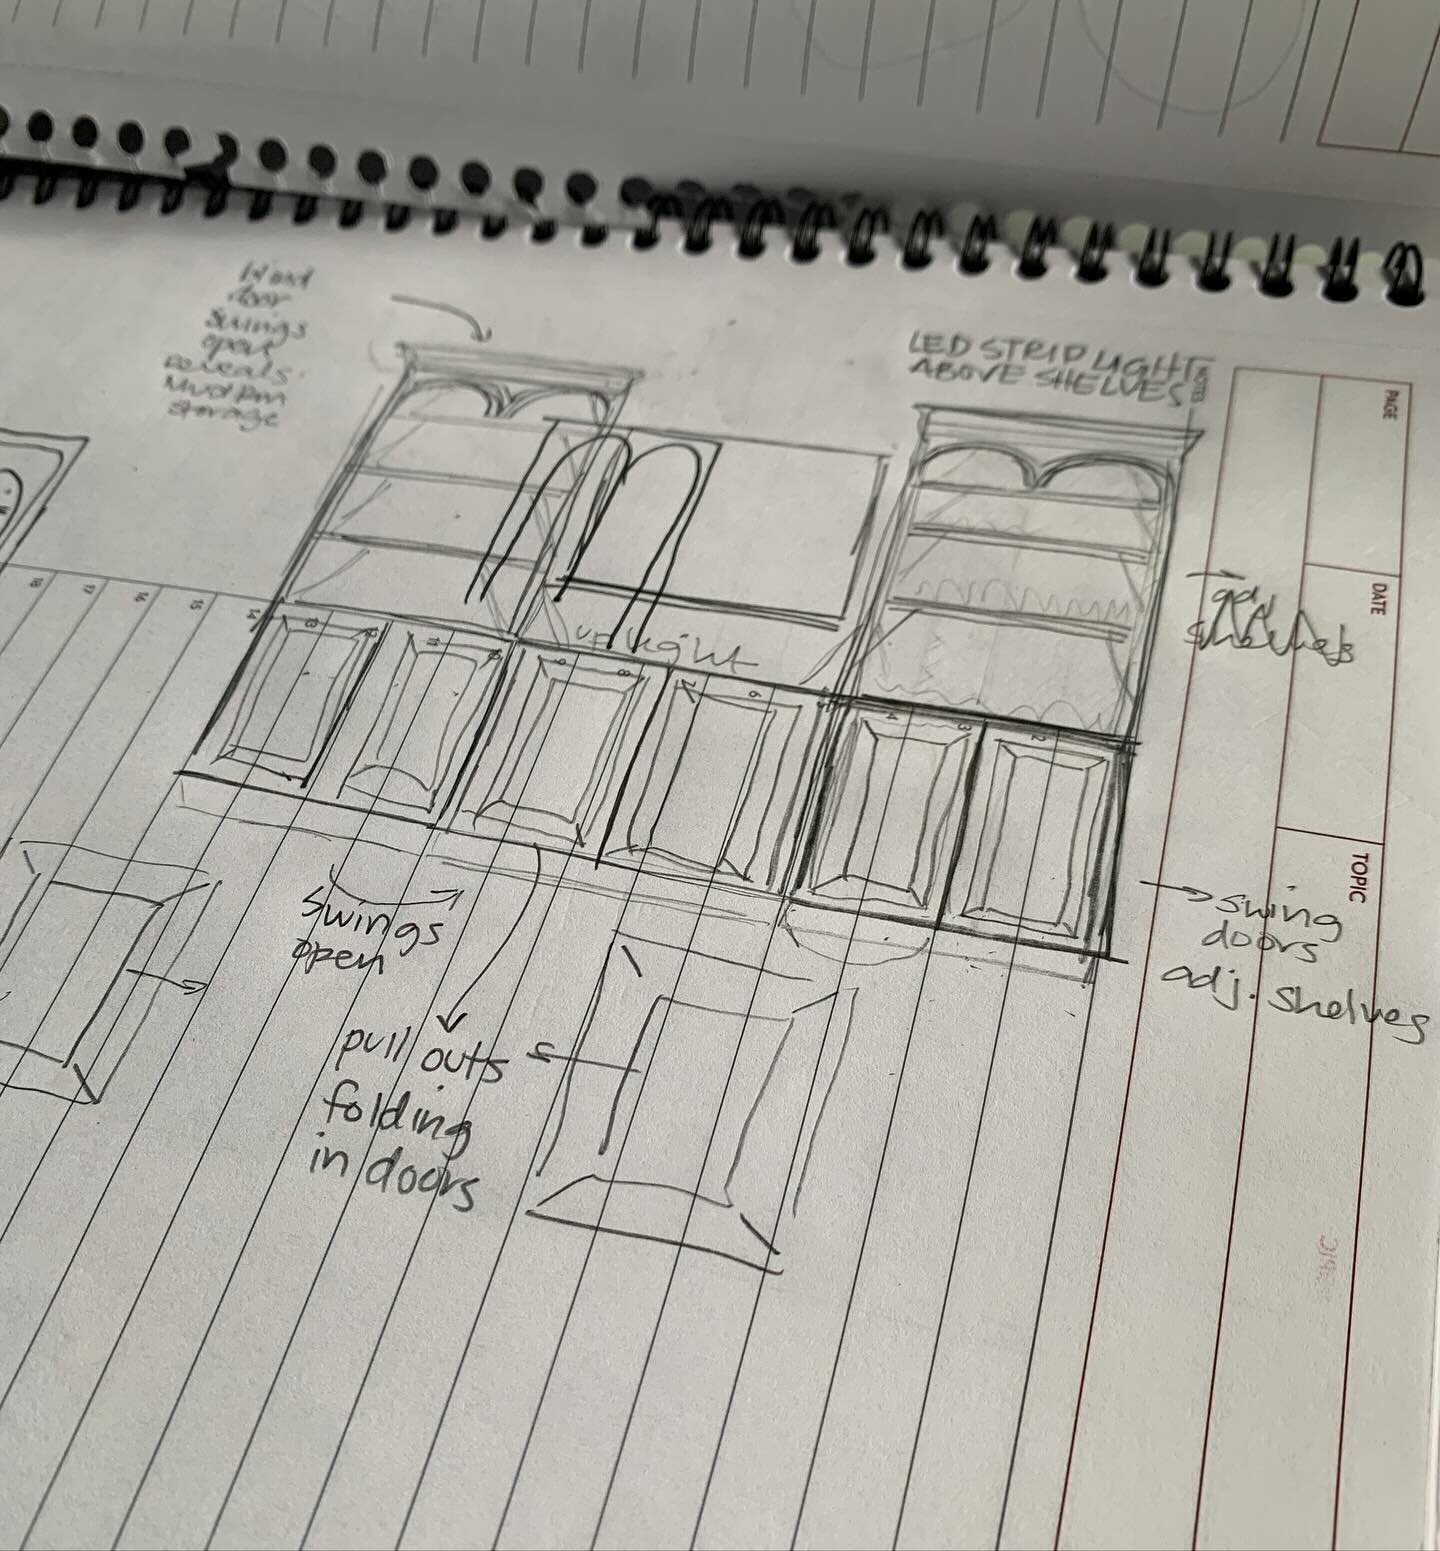 Sketching brings creativity! This one will have all the tricks #helloaehome #interiordesign #bayareainteriordesigner #custommade